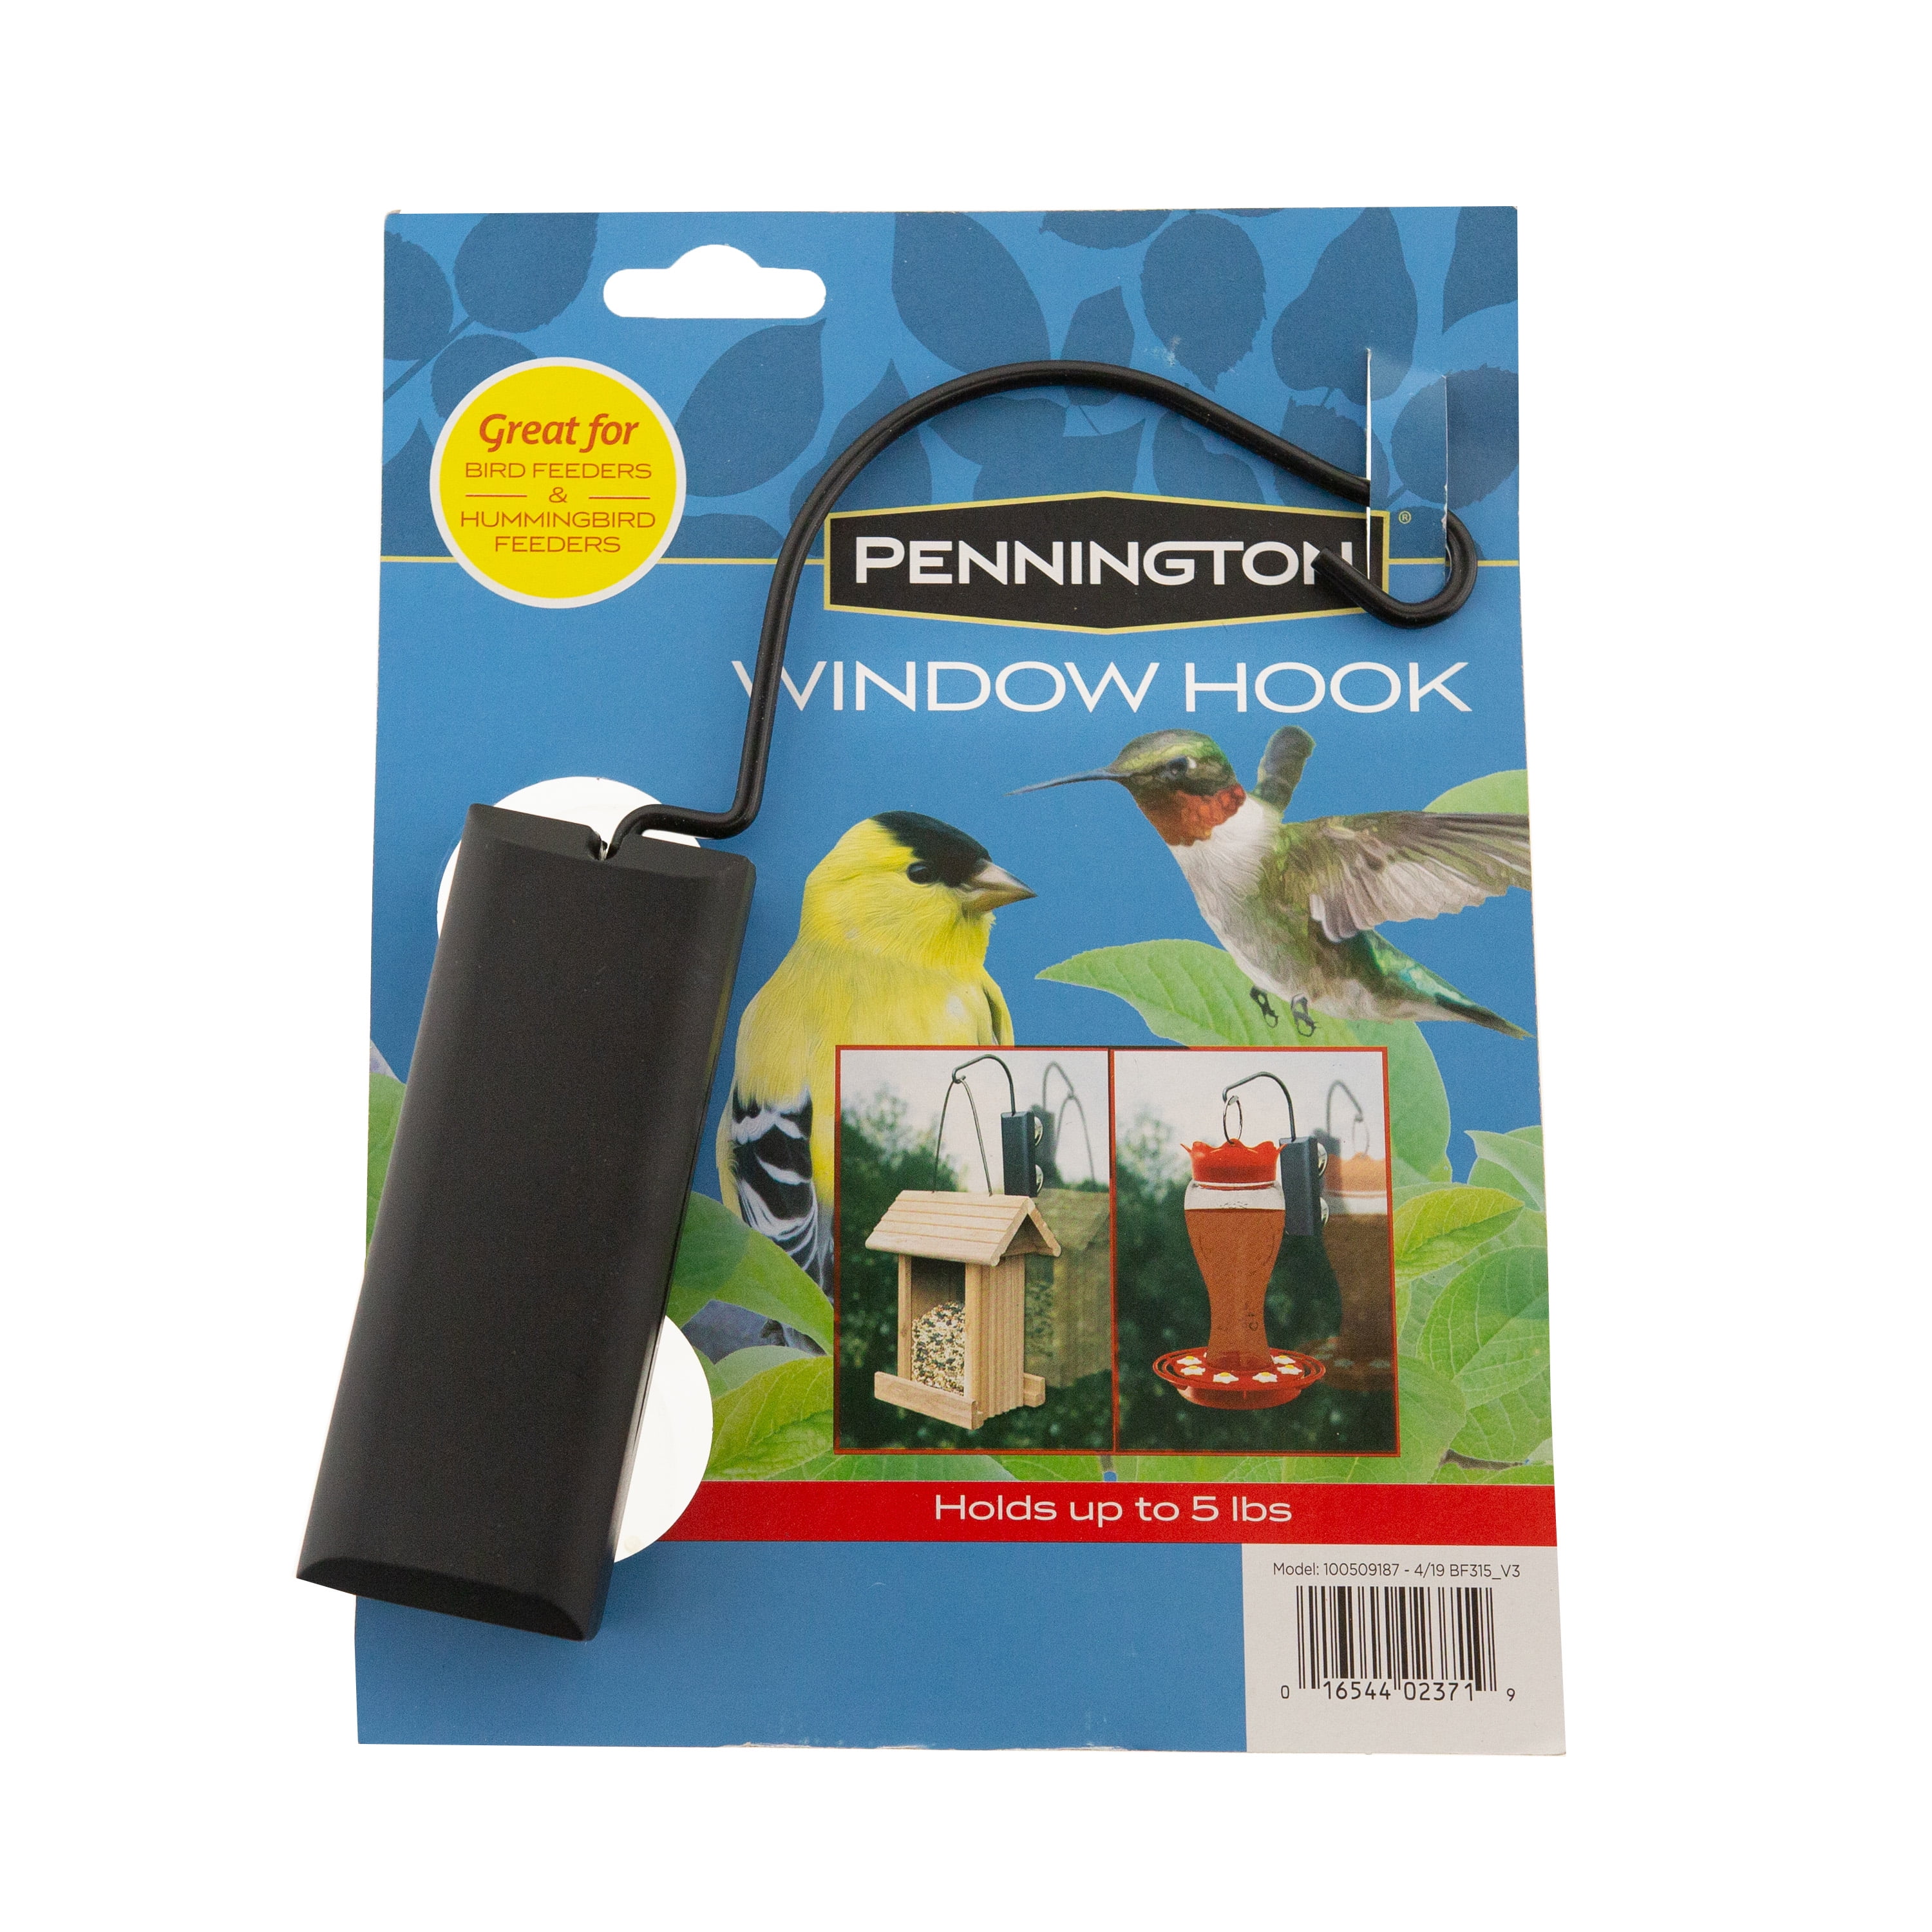 Mainstay Window View Bird Feeder Holds Up To 1 Lb Of Seed Heavy Duty Suction Cup 